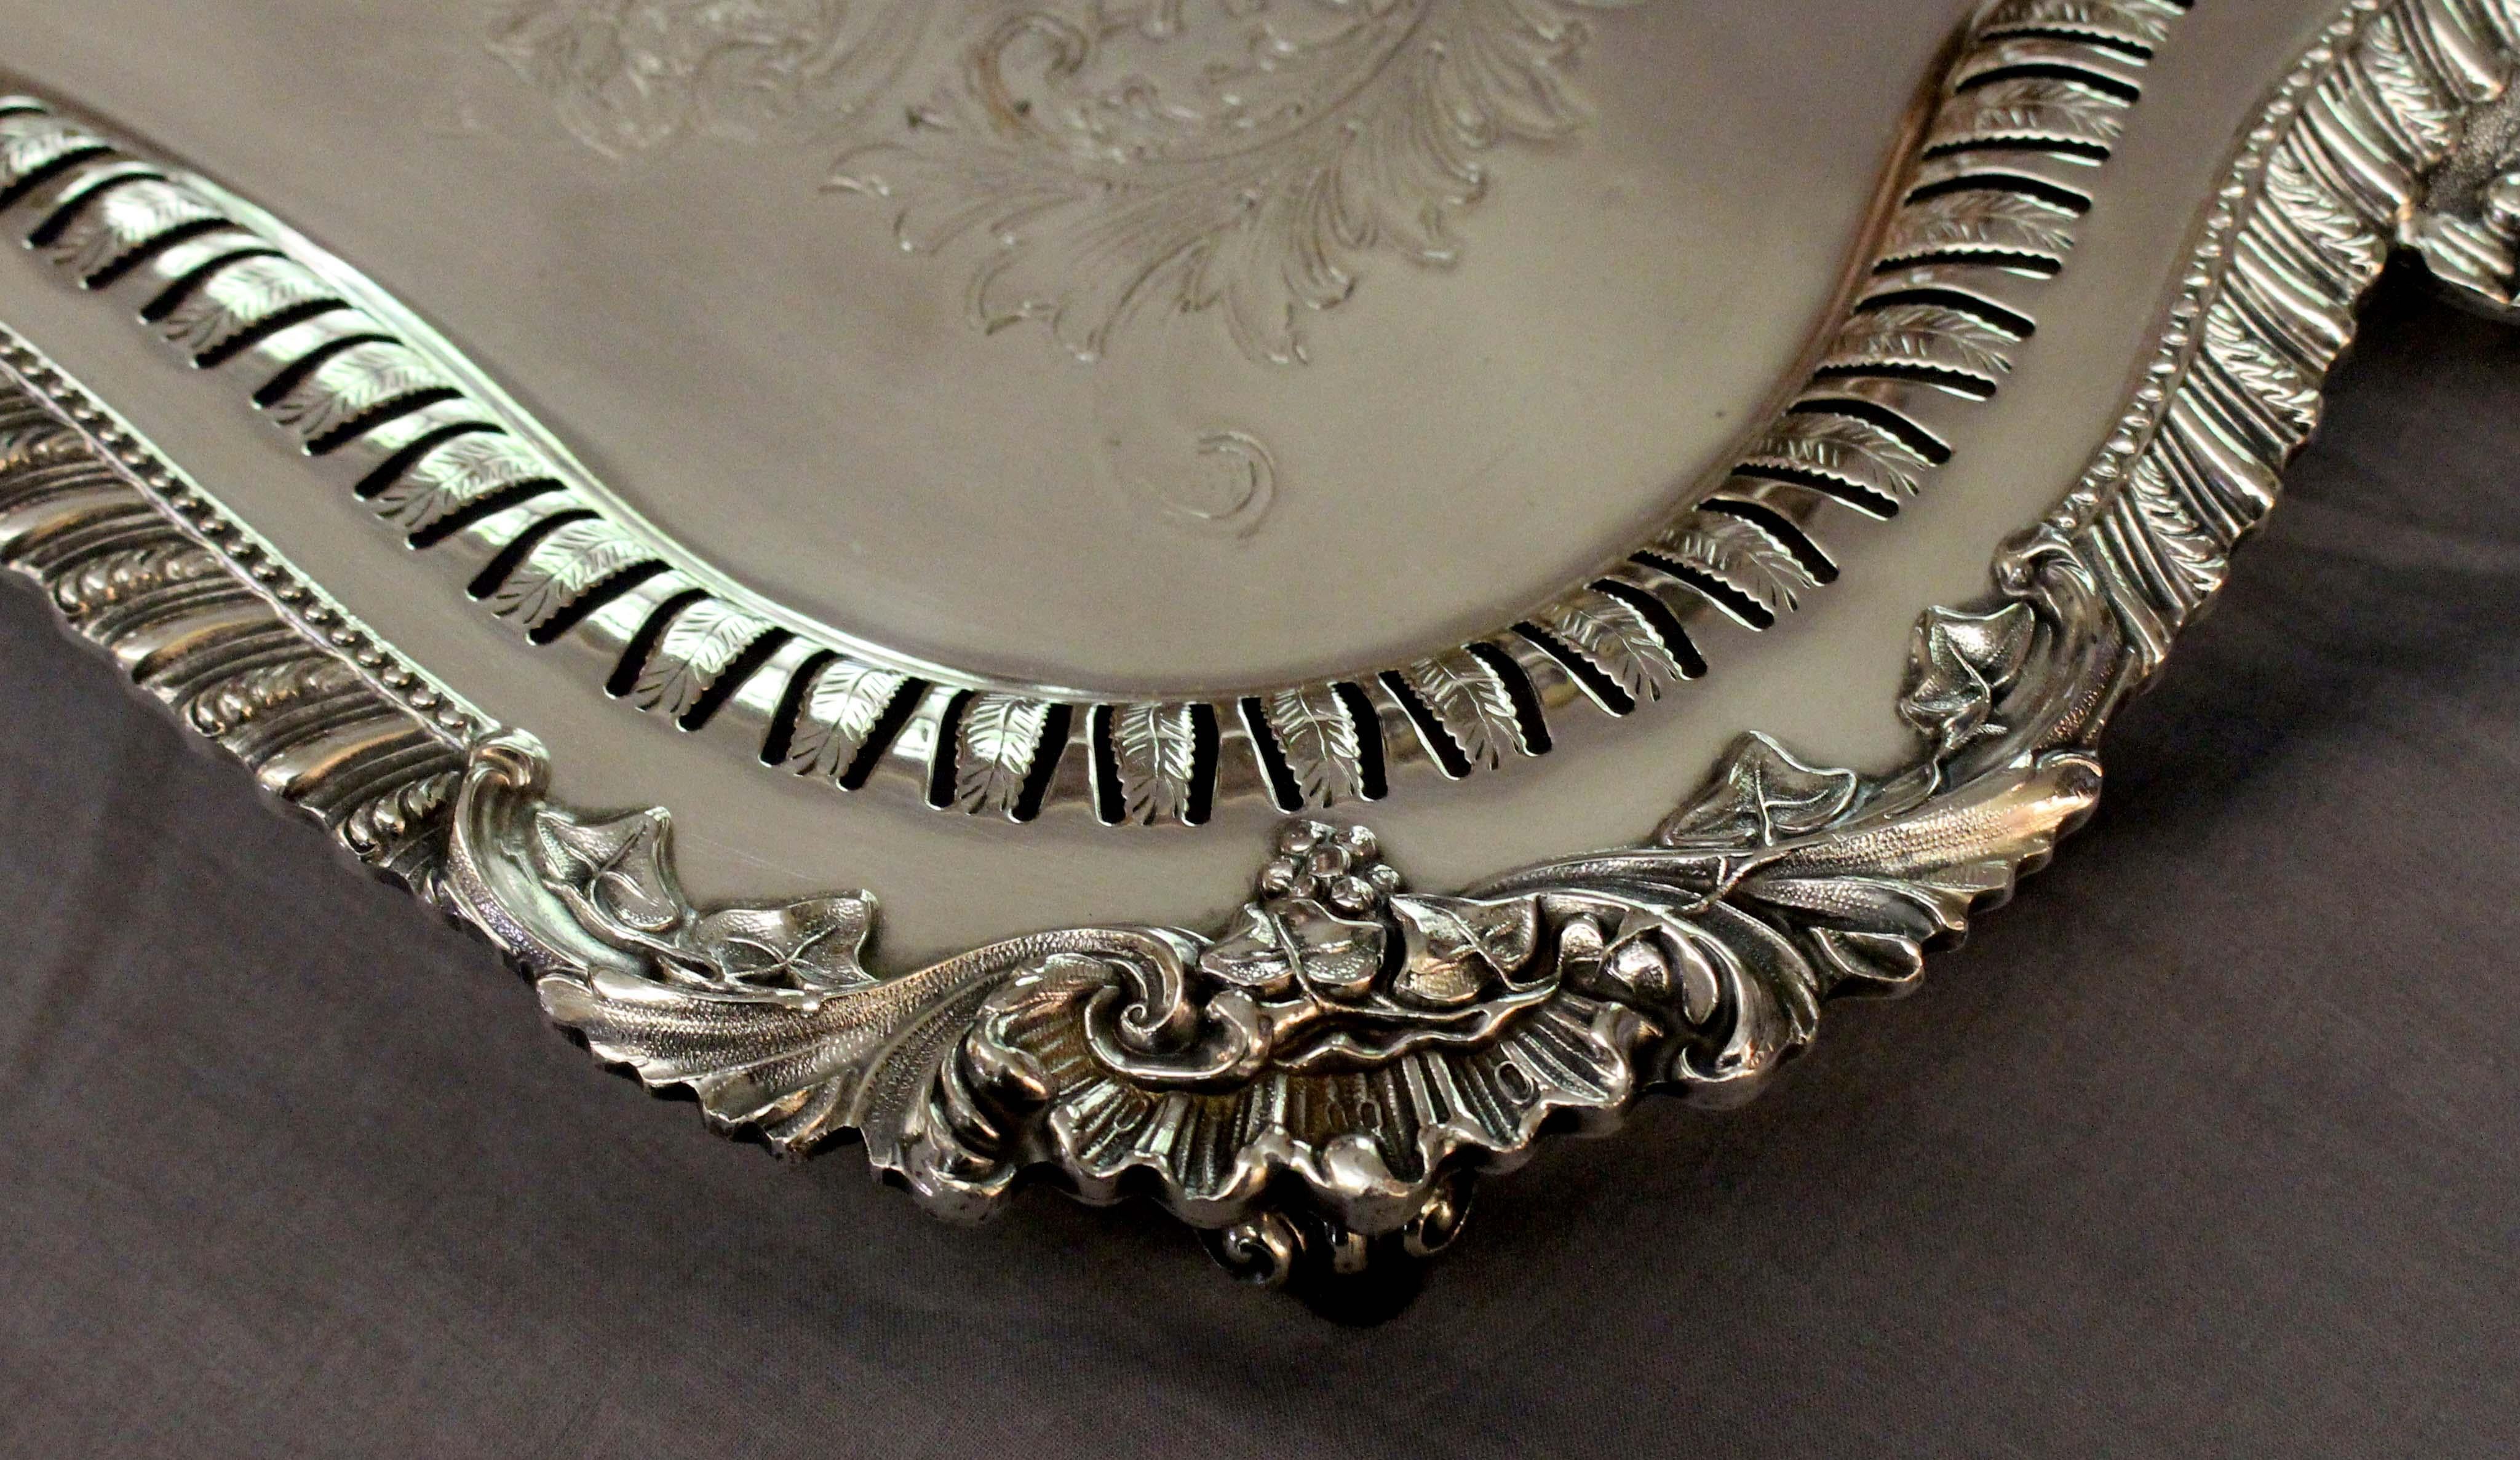 Circa 1940s Silver on Copper Tea Tray by the Crown Silver Co In Fair Condition For Sale In Chapel Hill, NC